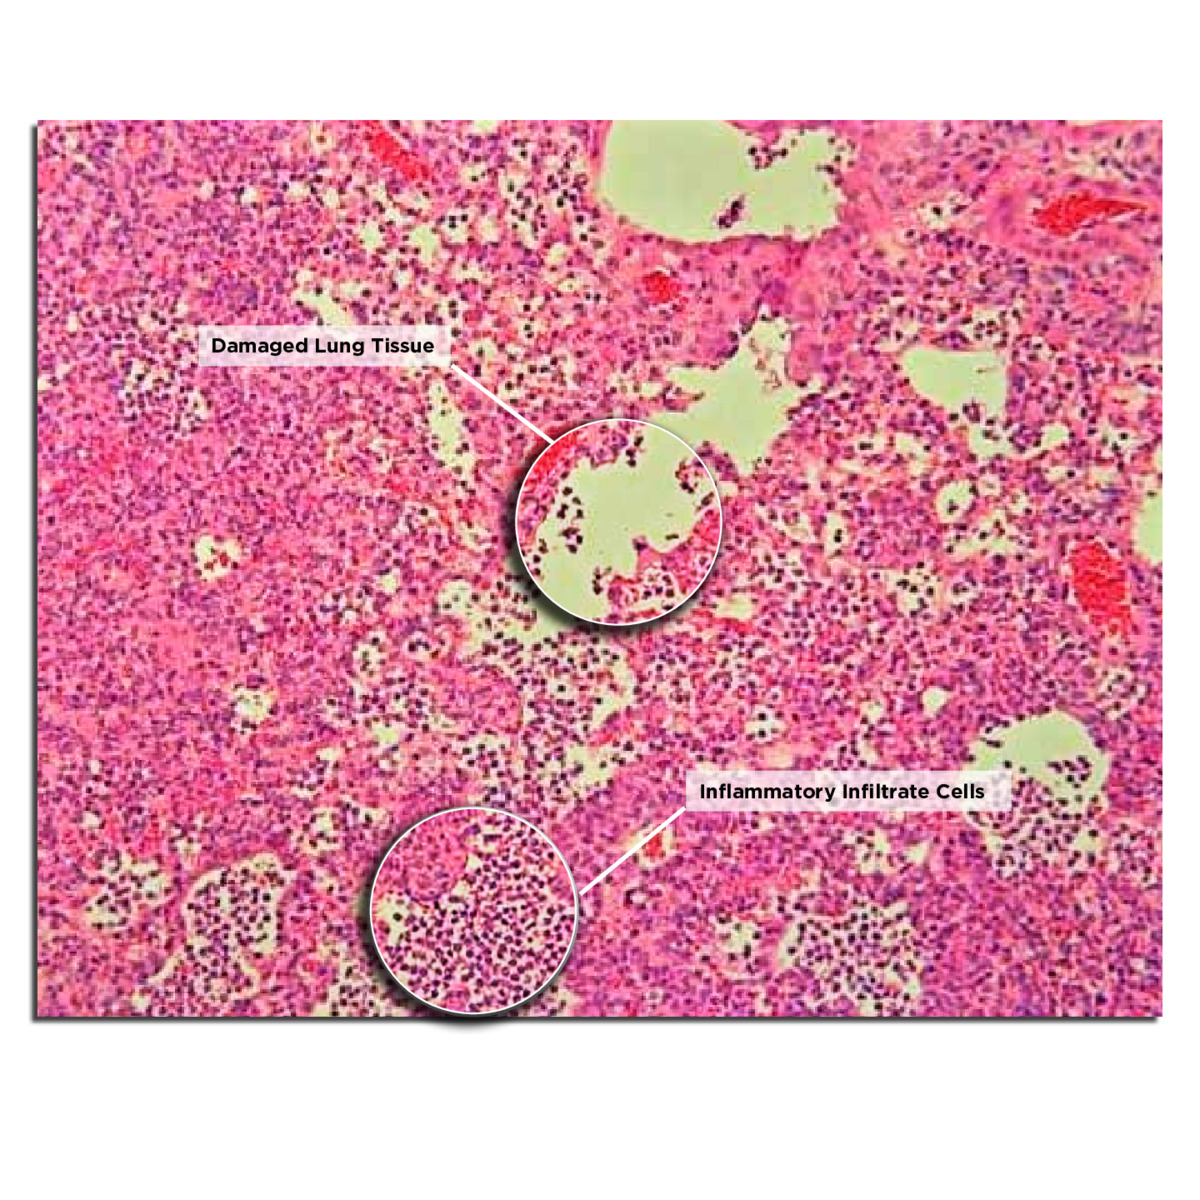 Histology image of a section of mouse lung infected with the reconstructed 1918 pandemic influenza virus, 2004 (labeled)